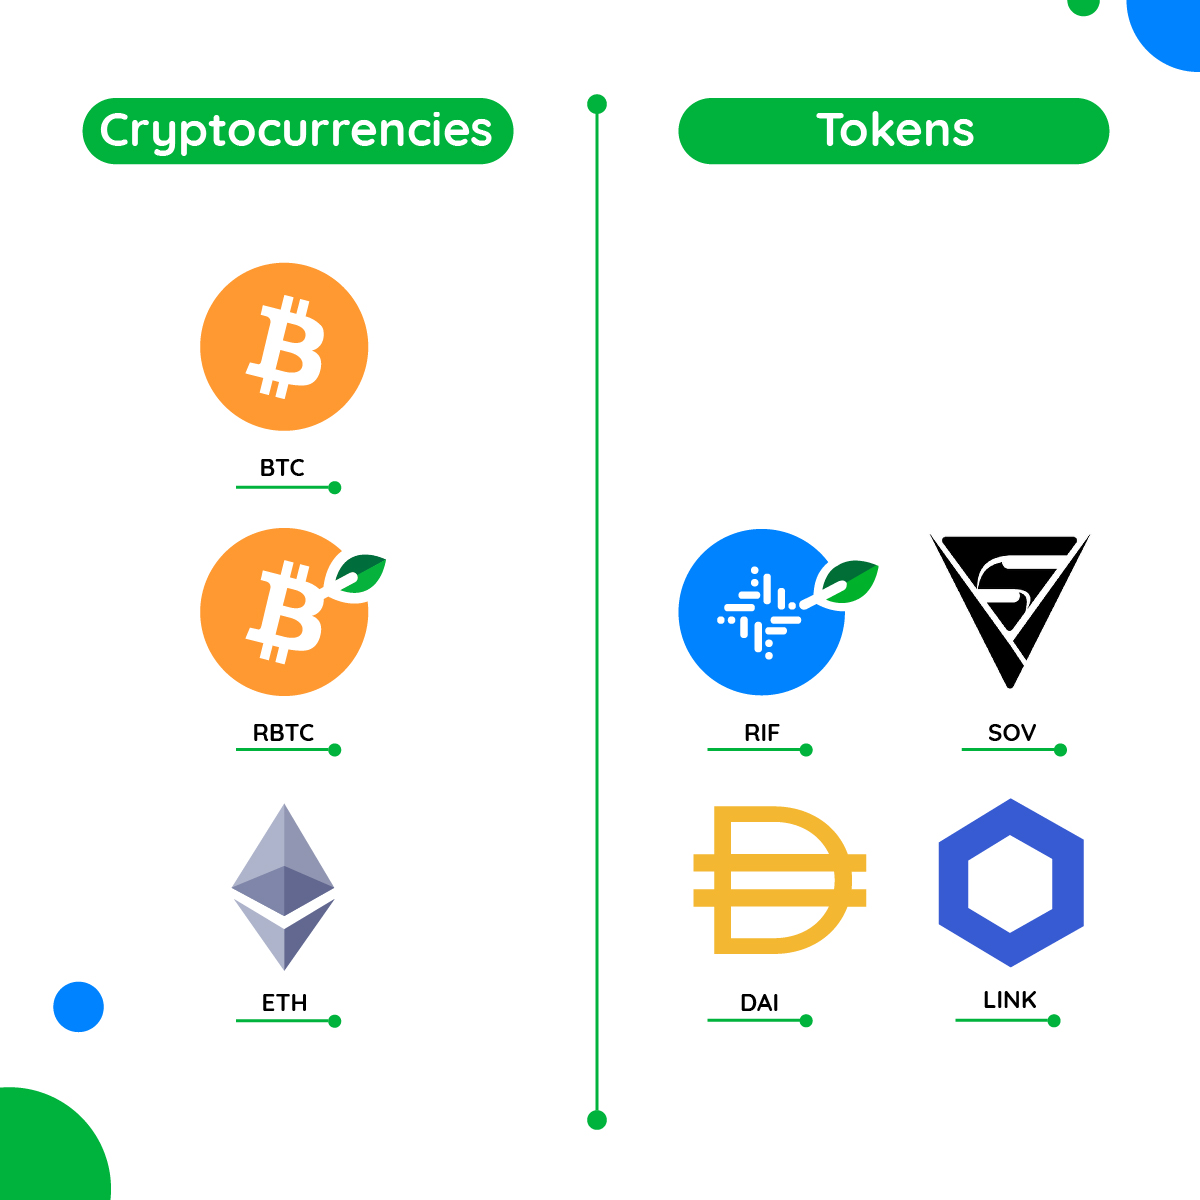 Some cryptocurrencies and tokens